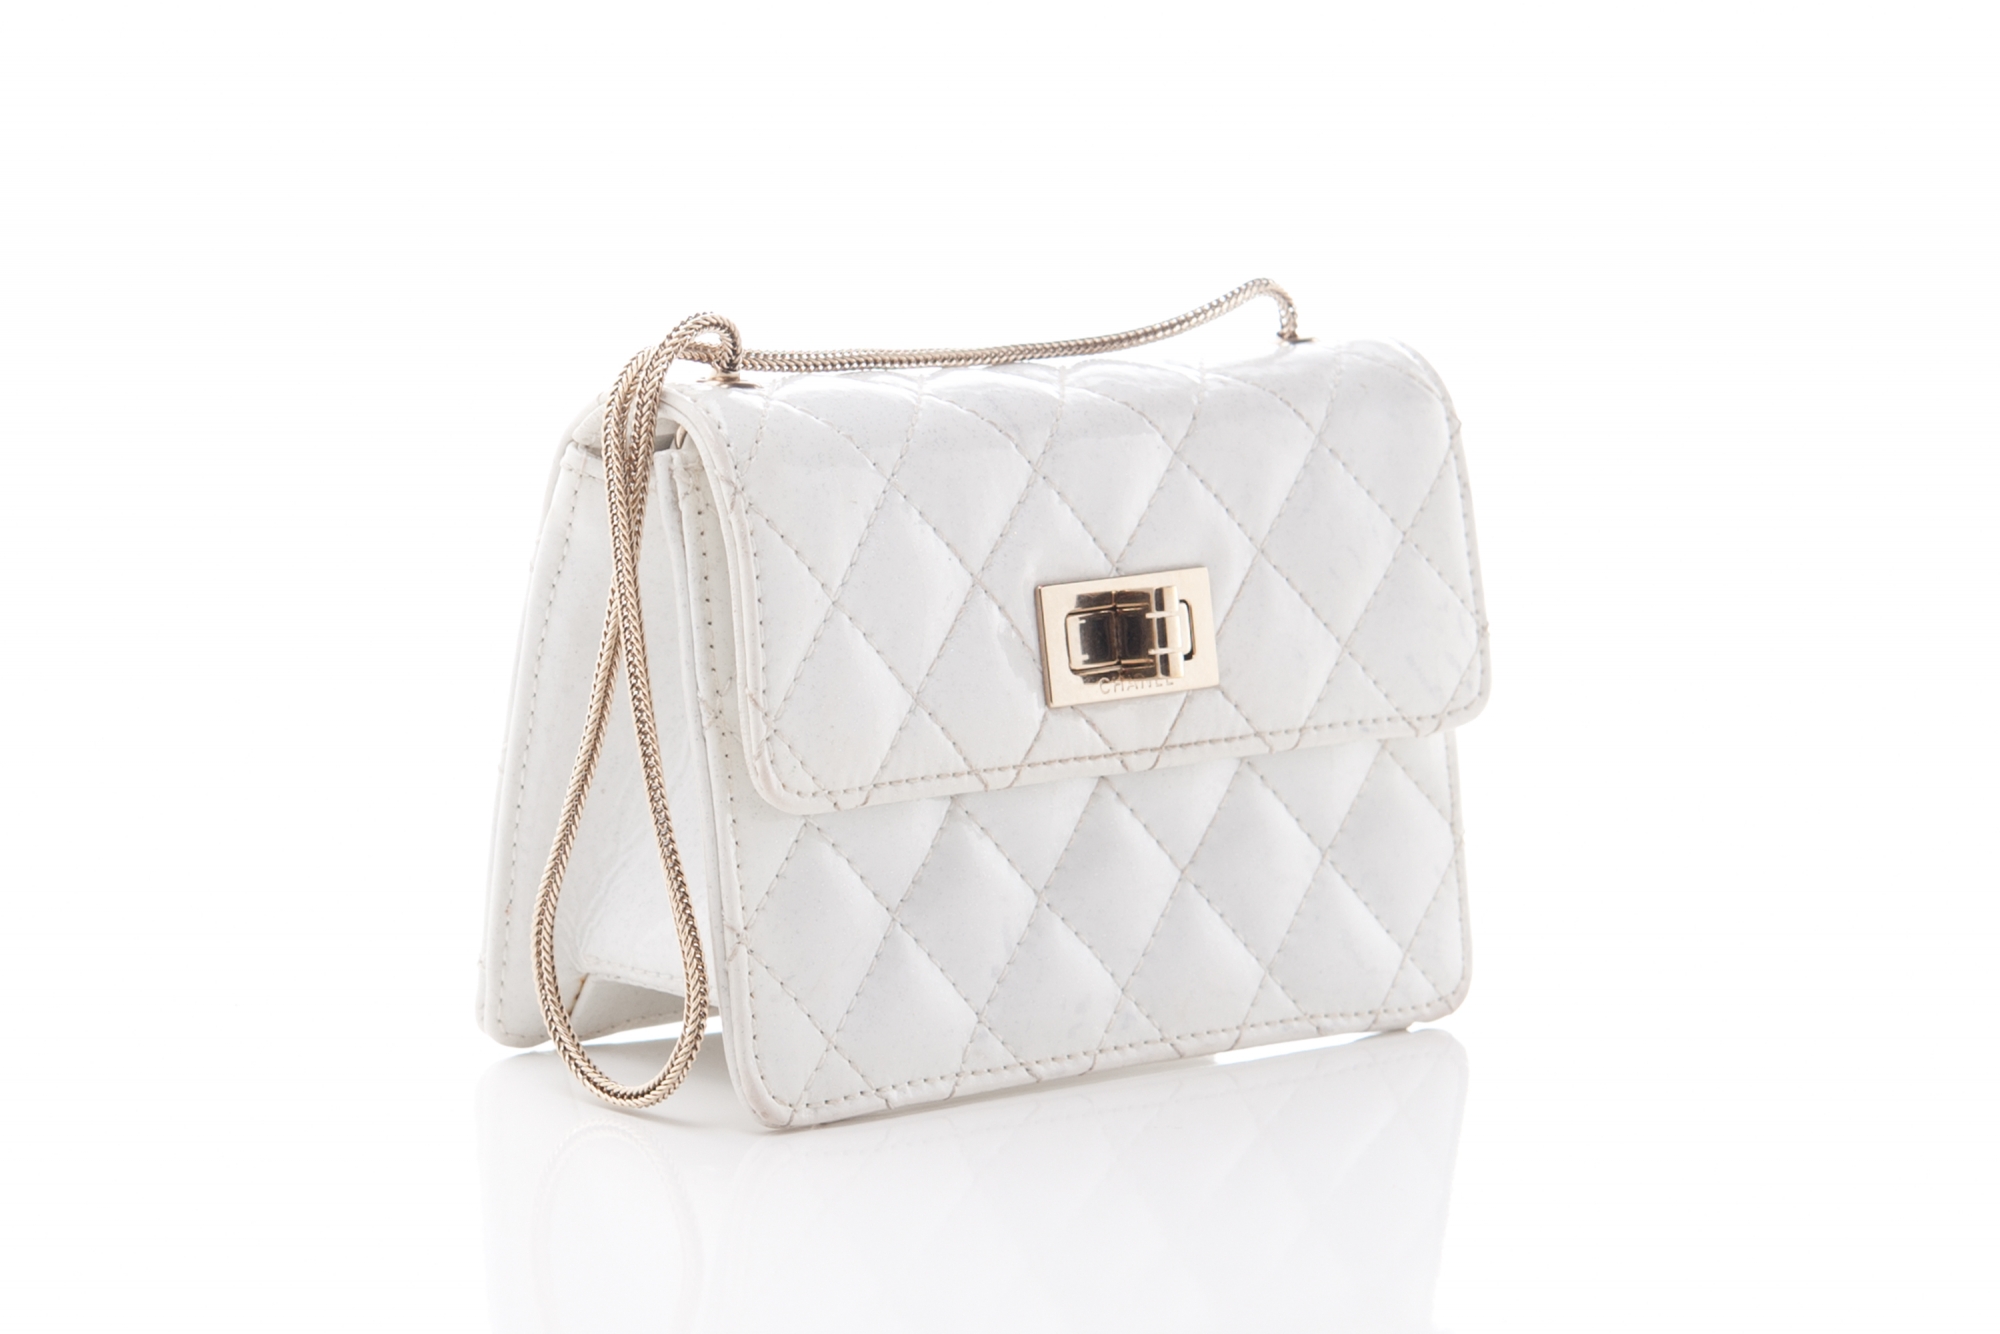 Chanel White Quilted Patent Leather 2.55 Reissue Mini Flap Bag